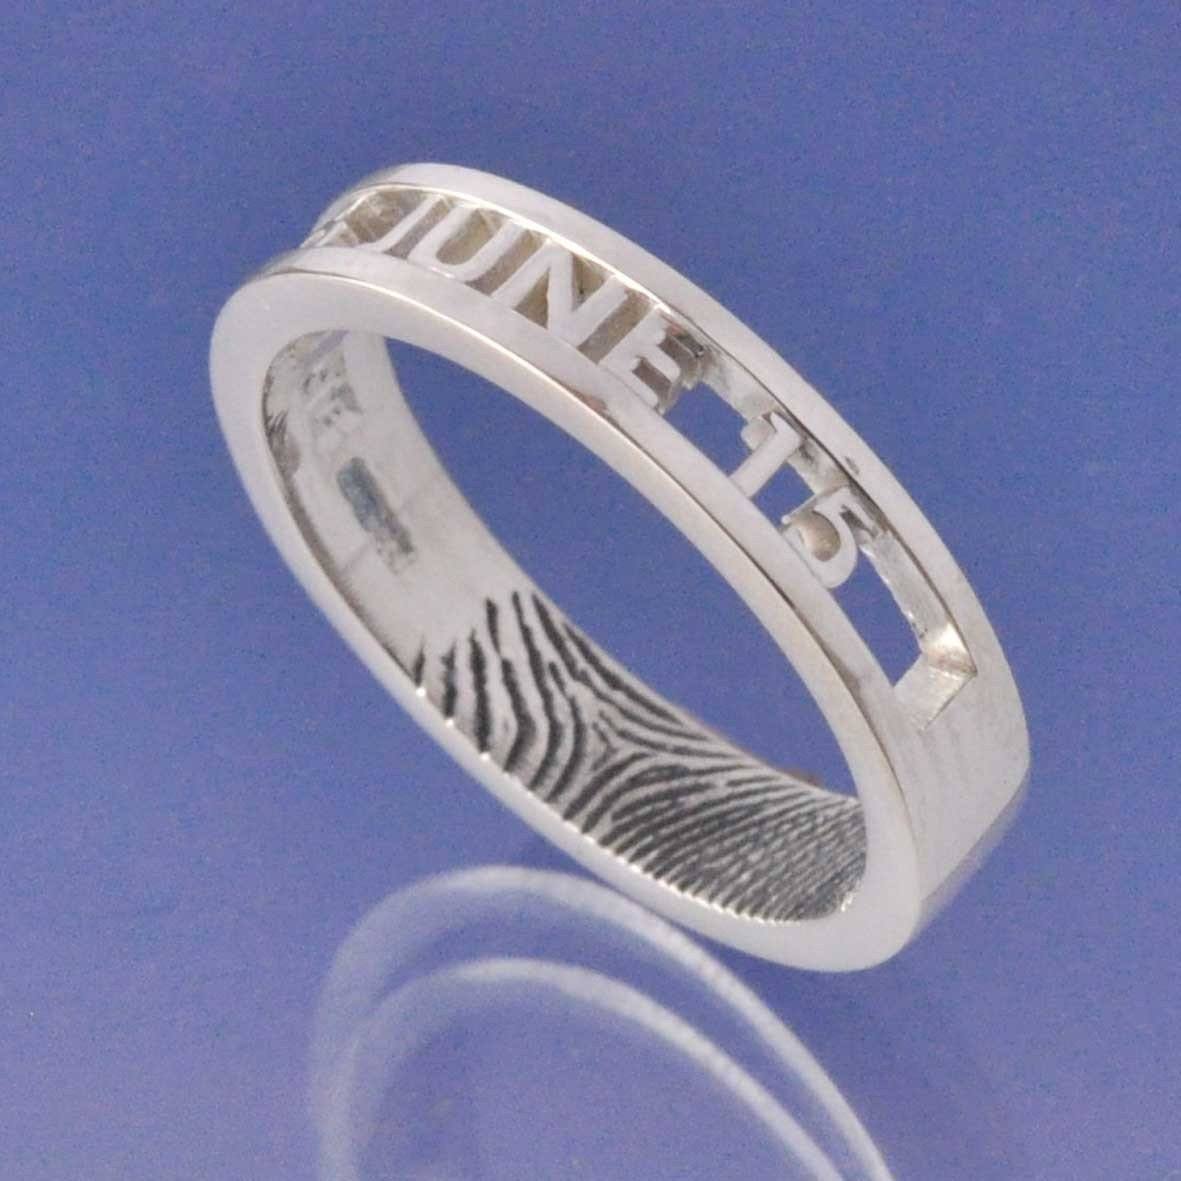 Fingerprint Ring - Cut Out Ring by Chris Parry Jewellery